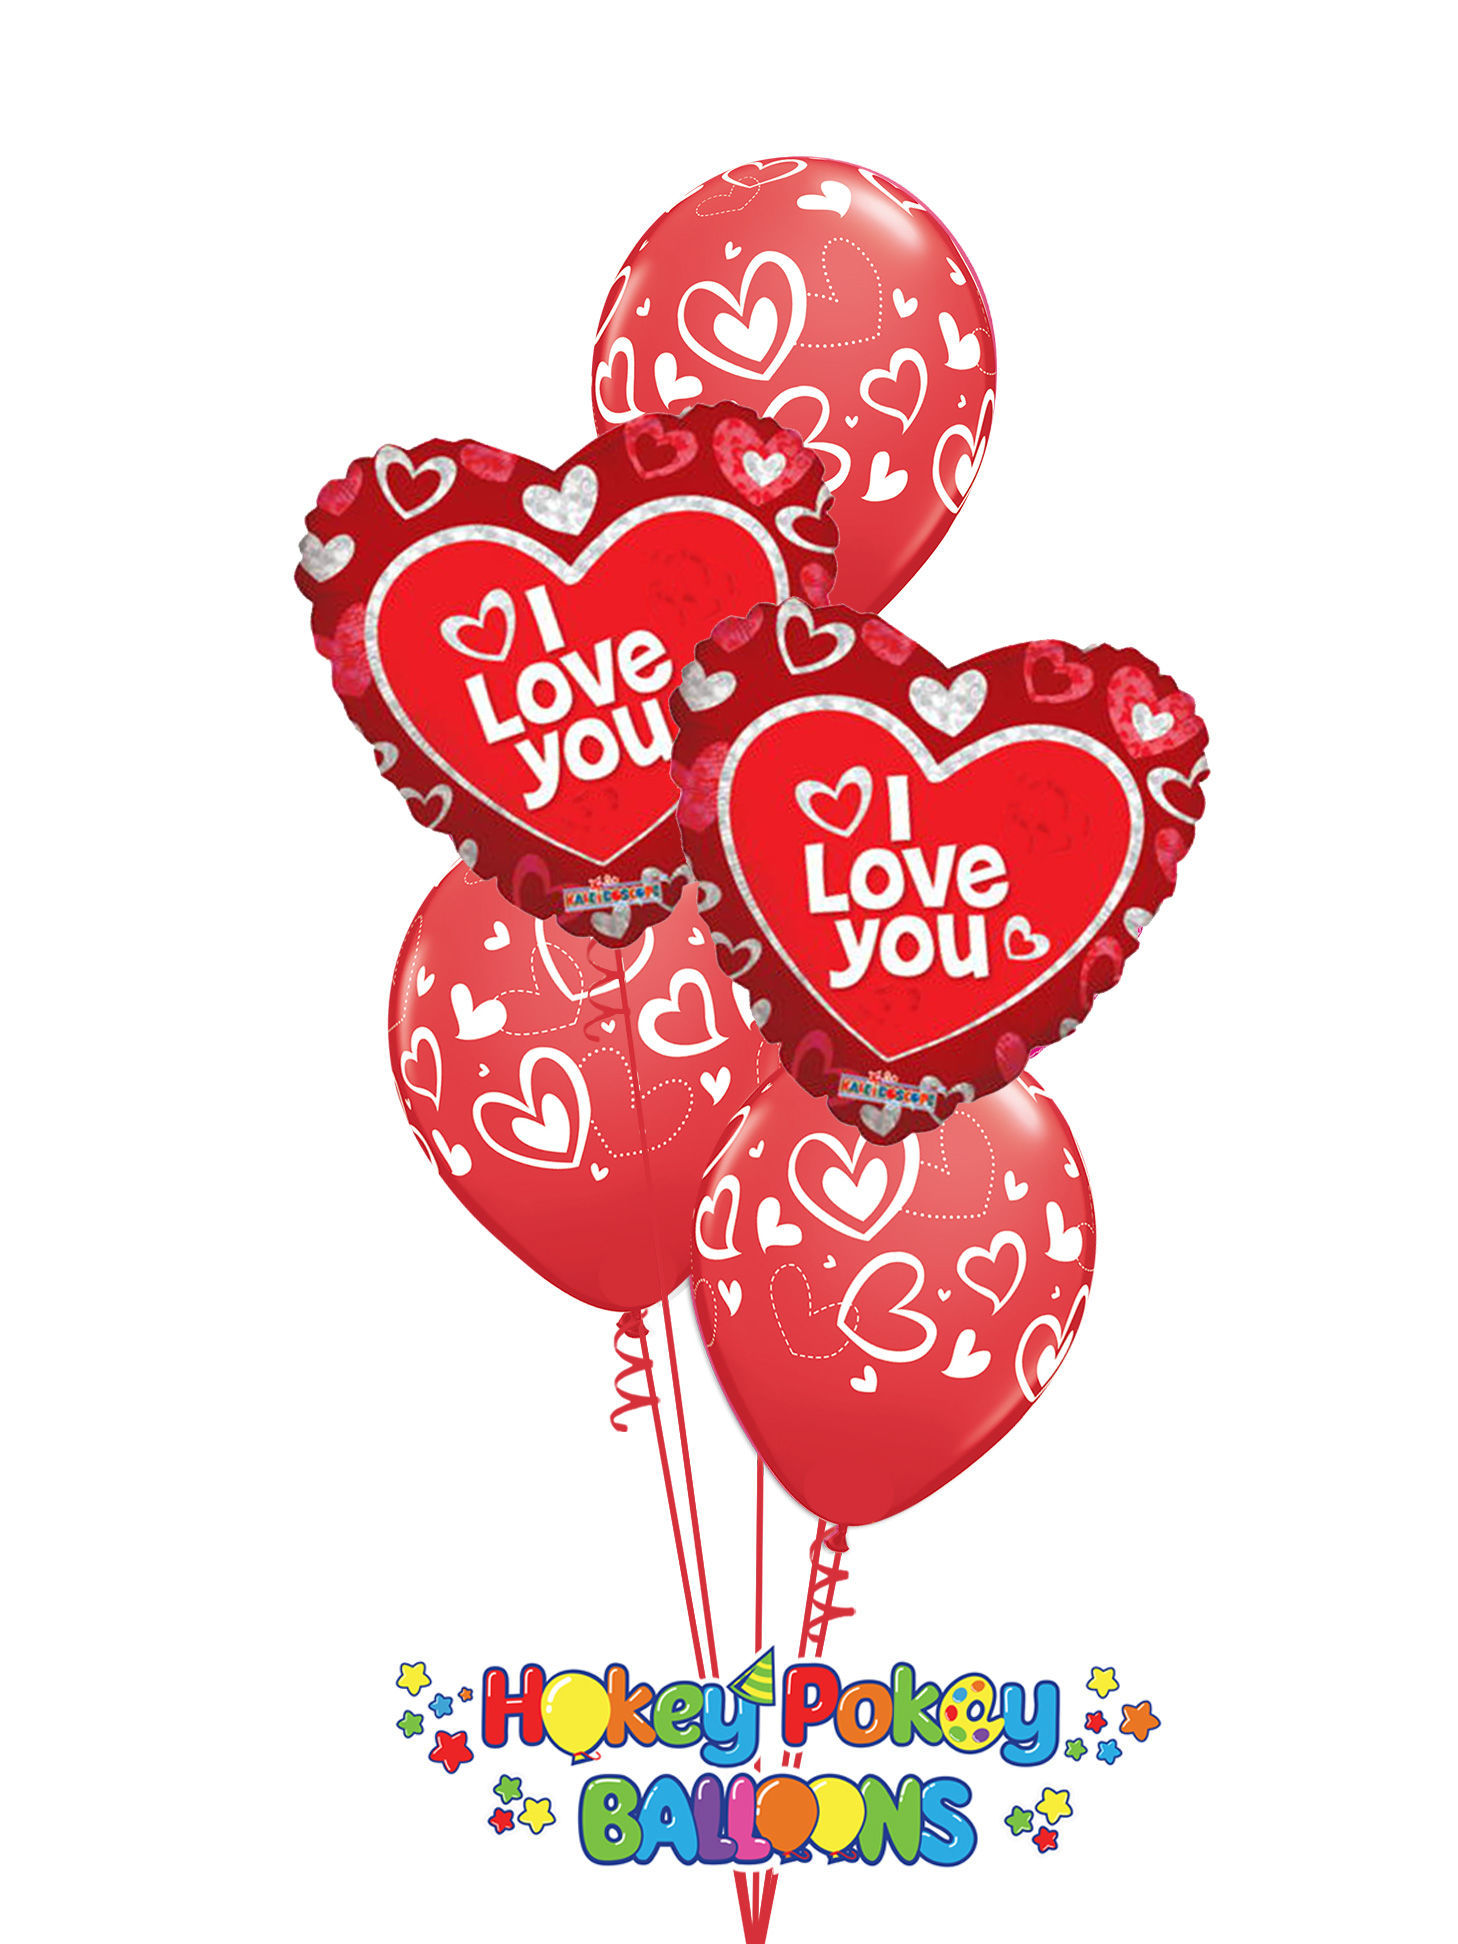 Picture of Mix & Match Red Hearts Mother's Day Balloon Bouquet of 5